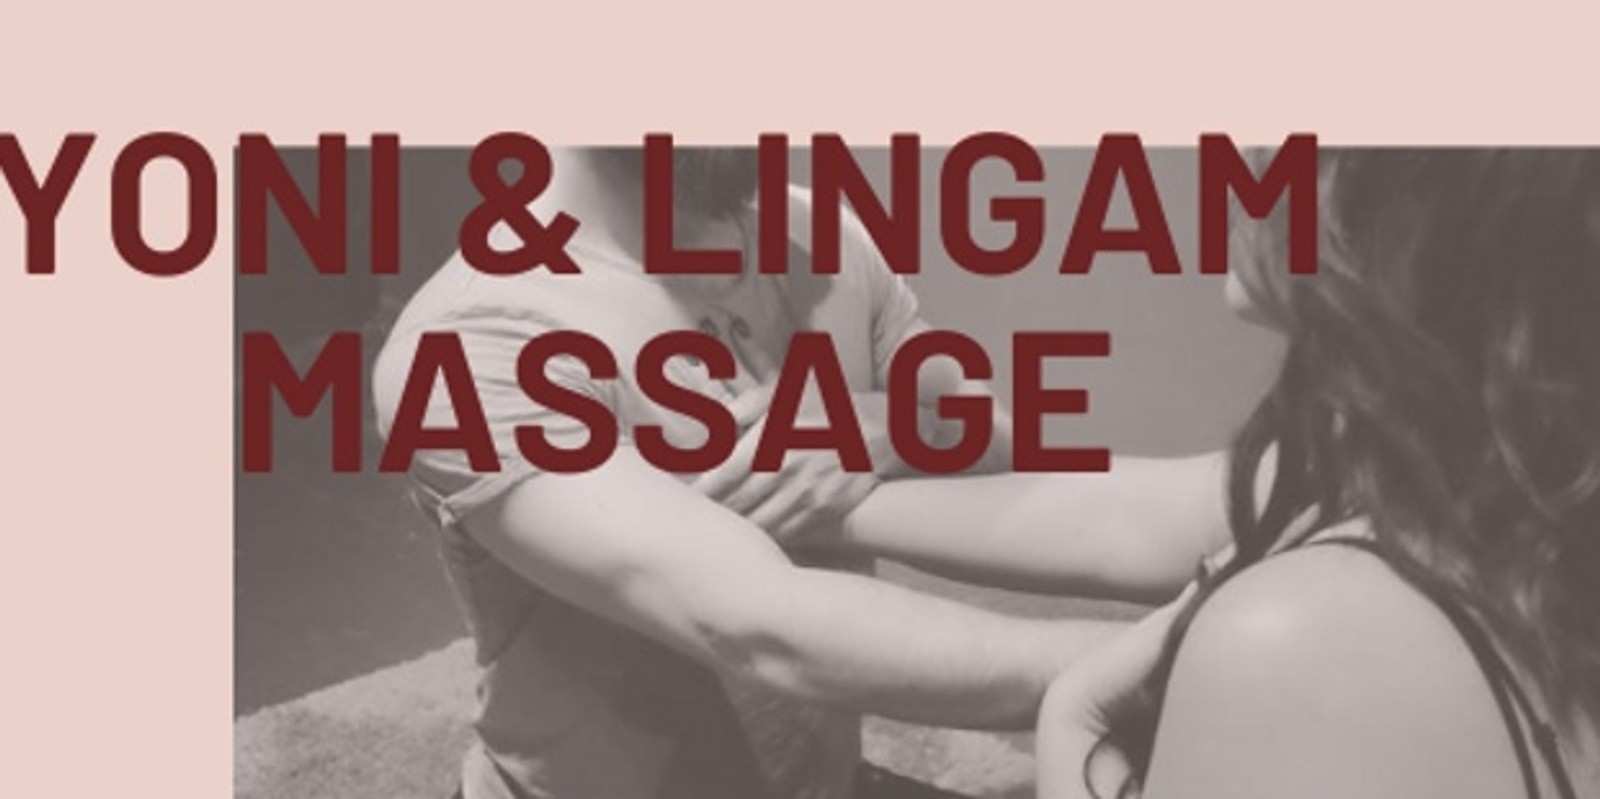 barbara kovacic recommends yoni and lingham massage pic